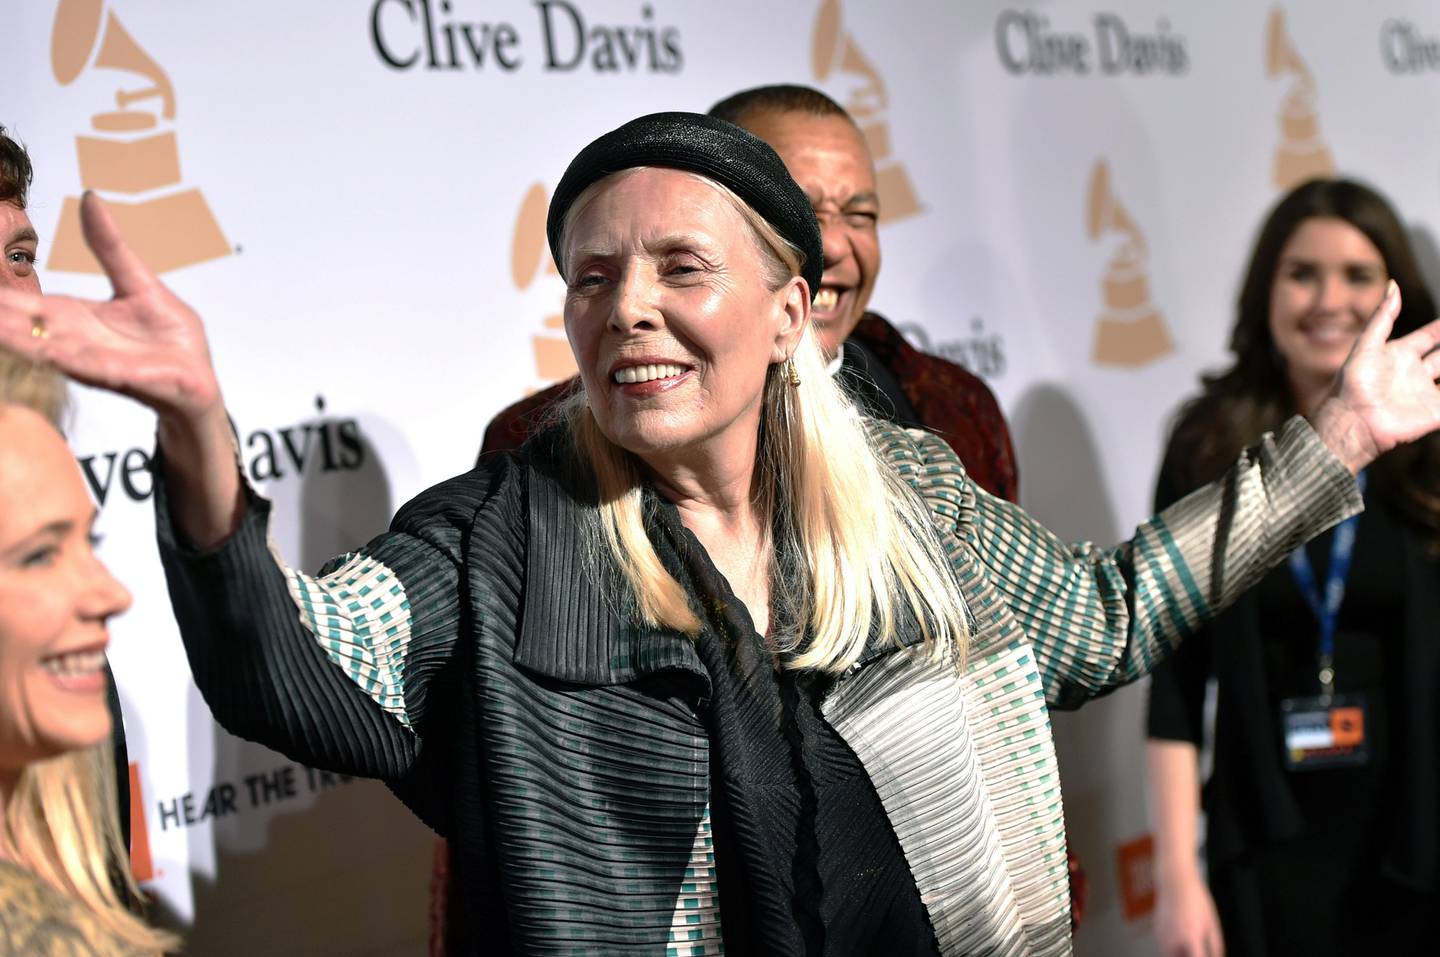 Joni Mitchell removed her music from Spotify 'in solidarity' with Neil Young. AP